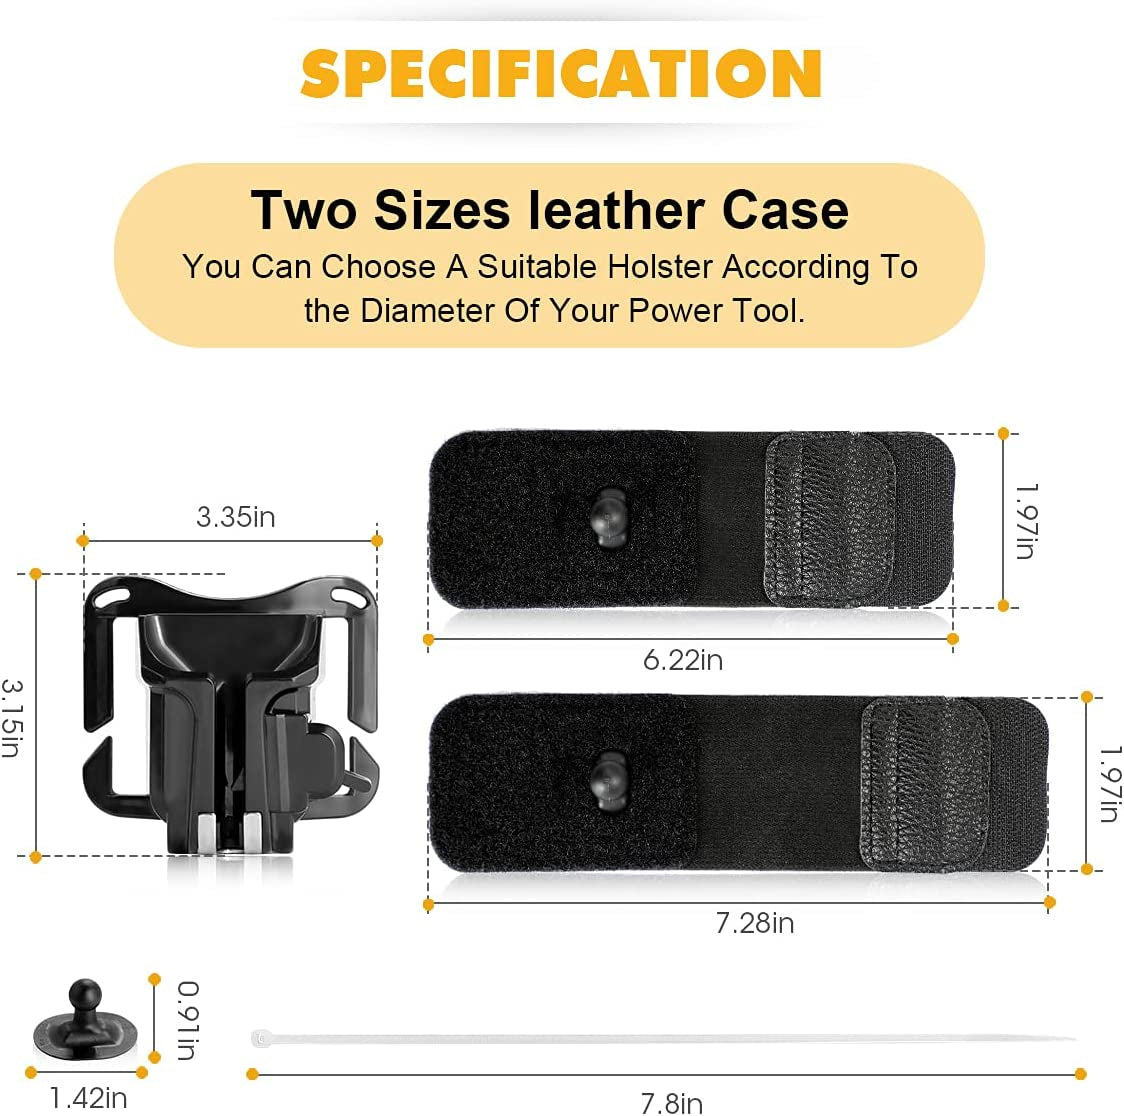 Lenink, Lenink Tool Holster Compatible with Dewalt Drill, 2 Pack Drill Holster Cordless Drill Hook Power Tool Holder Belt Hook for Drill, Flashlight, Angle Grinder, Mini Chainsaws, Drivers